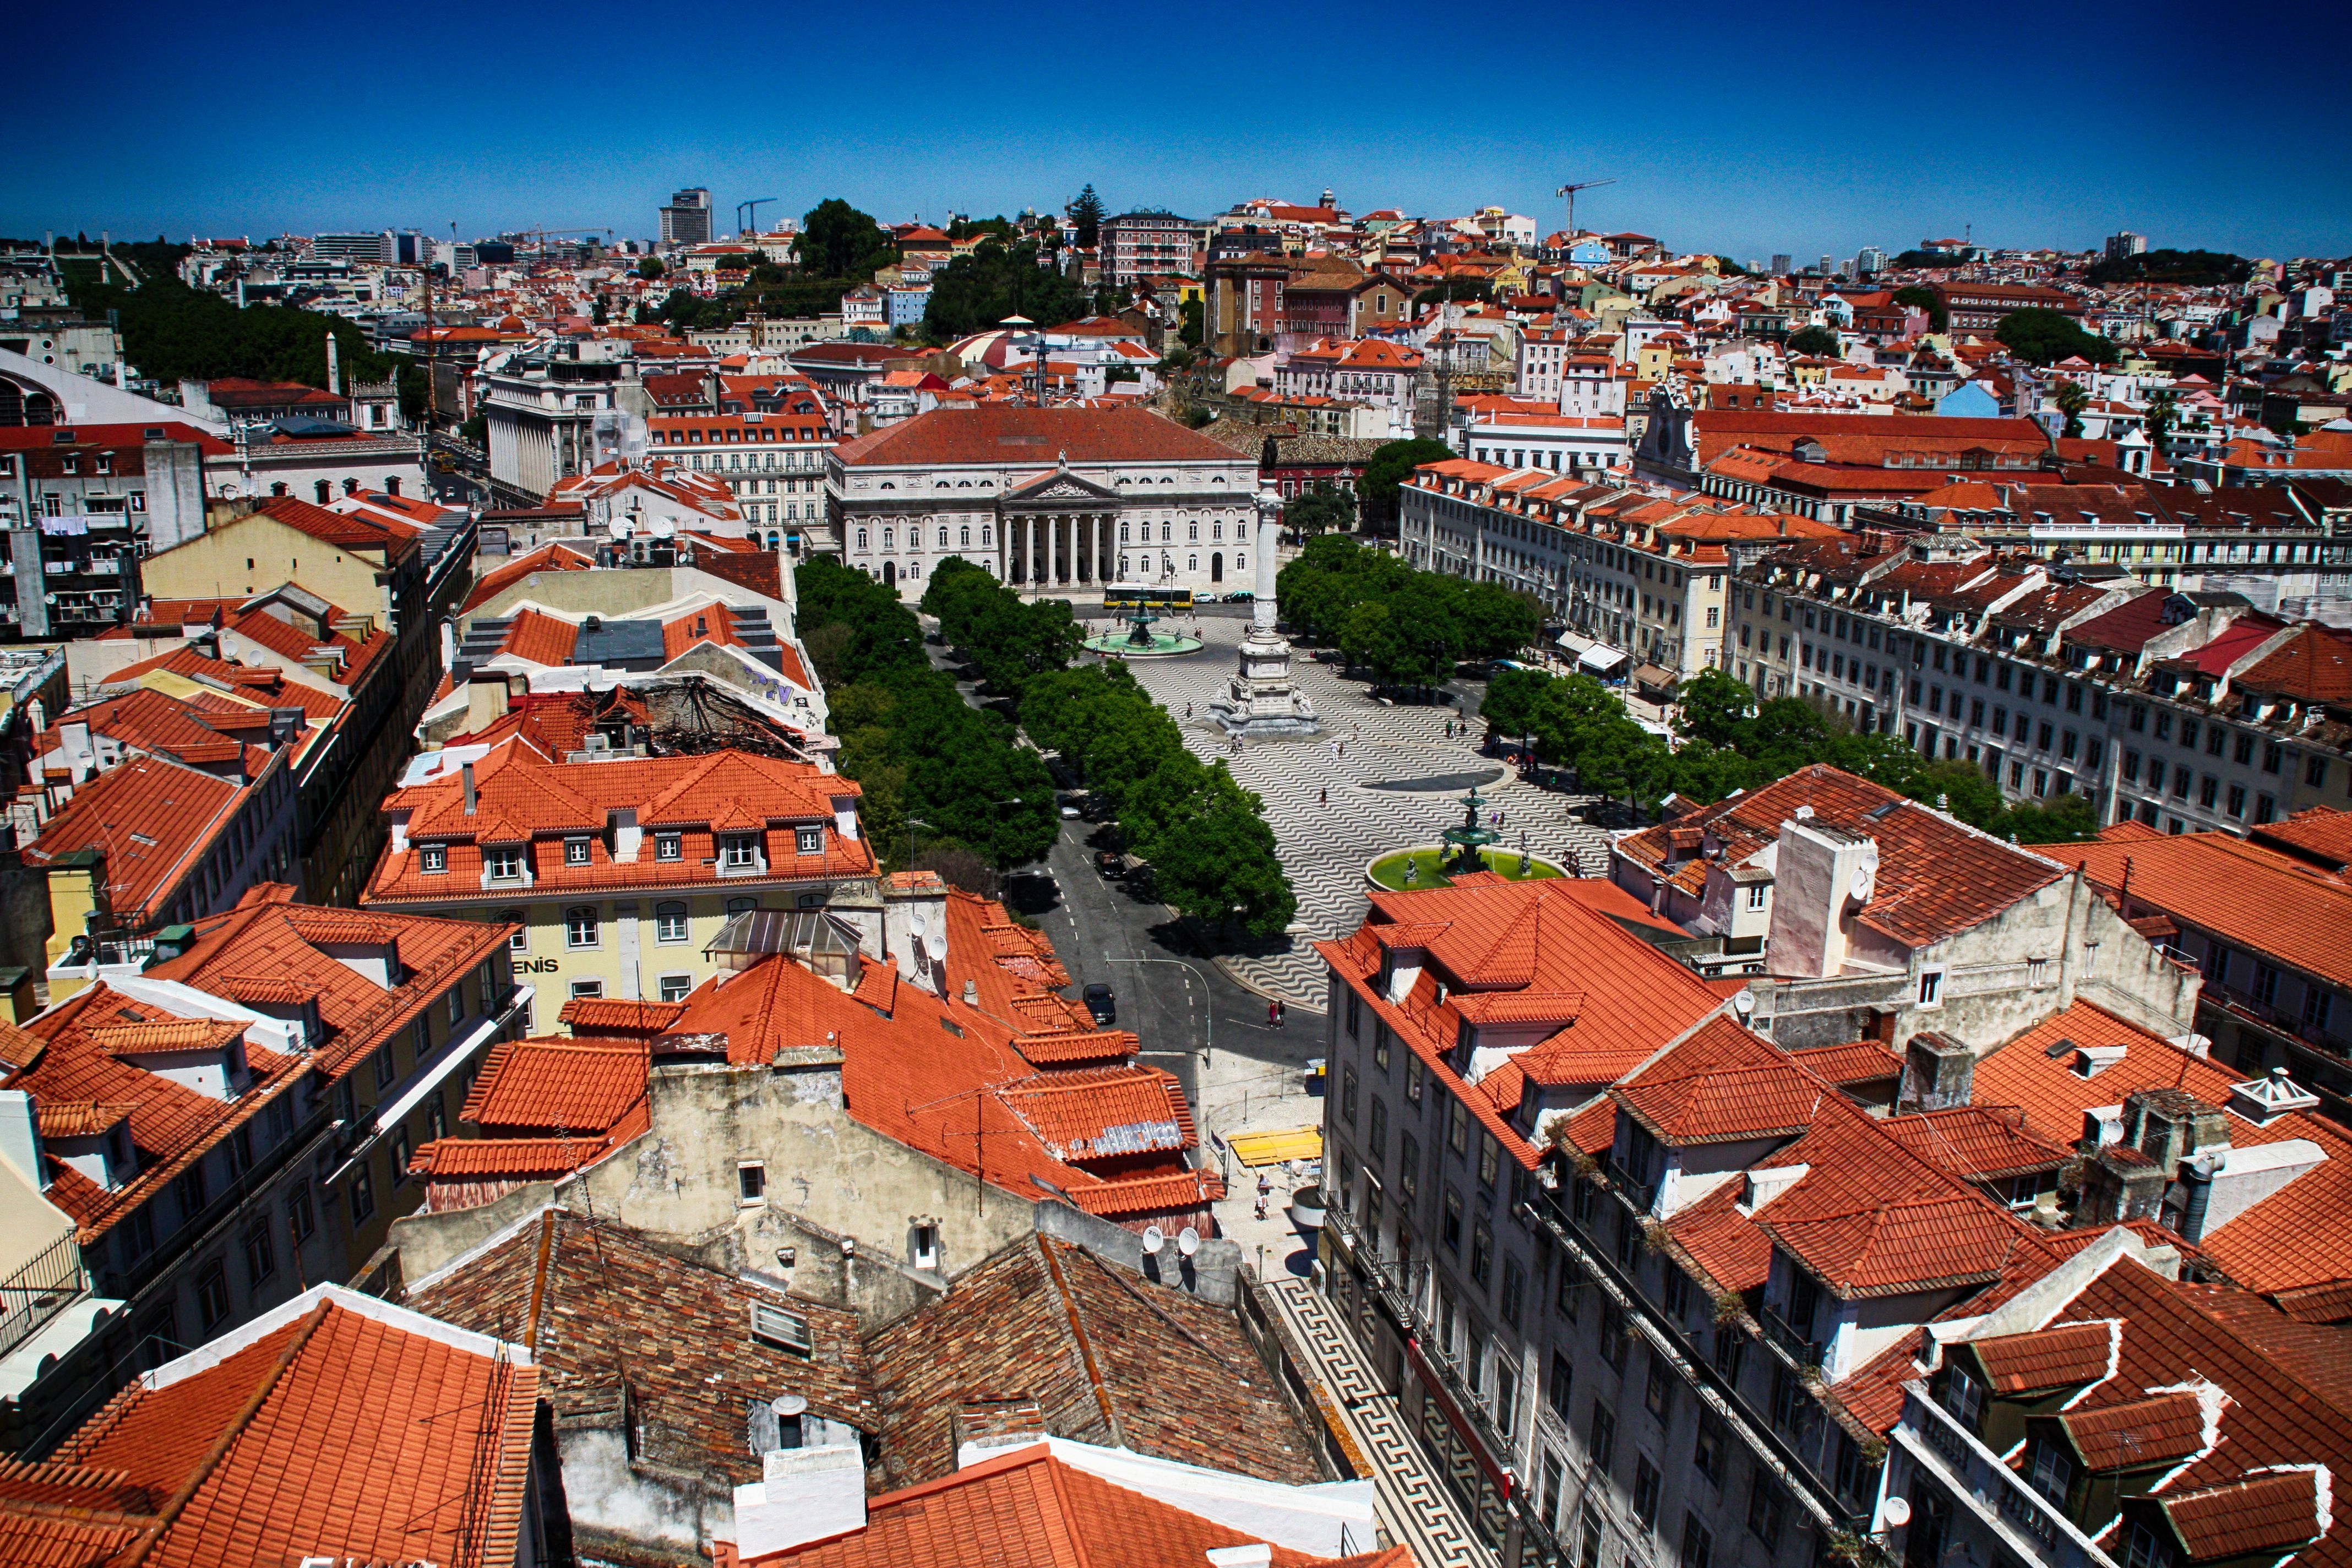 Hd desktop cities city lisbon portugal man made download free picture